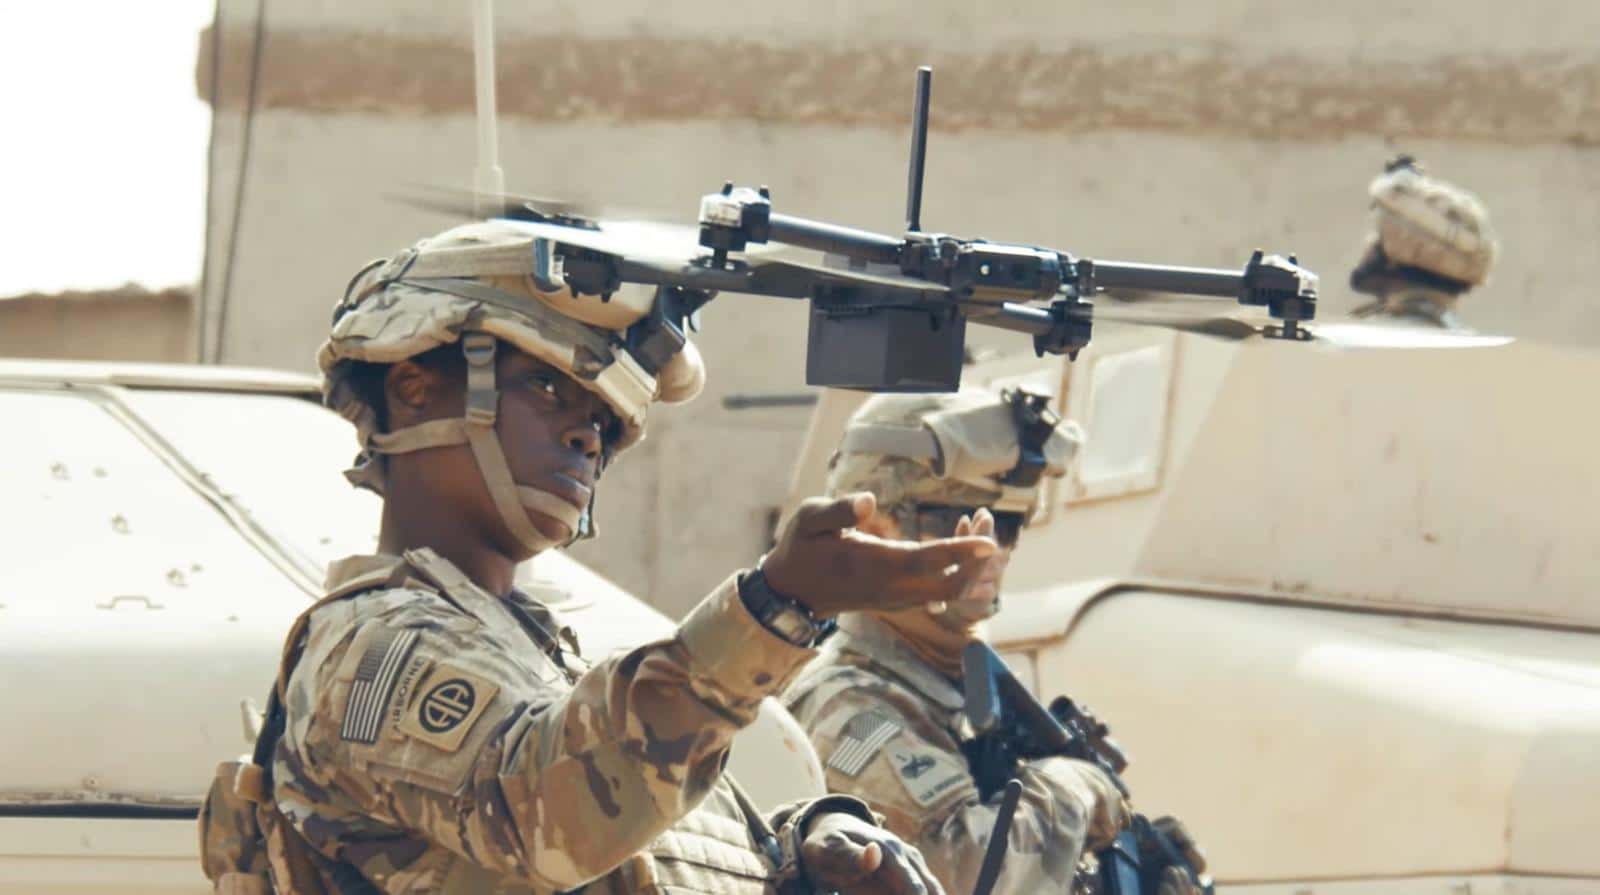 The US Army has allocated $ 20 million to the development of Skydio X2D, i.e. foldable AI drones